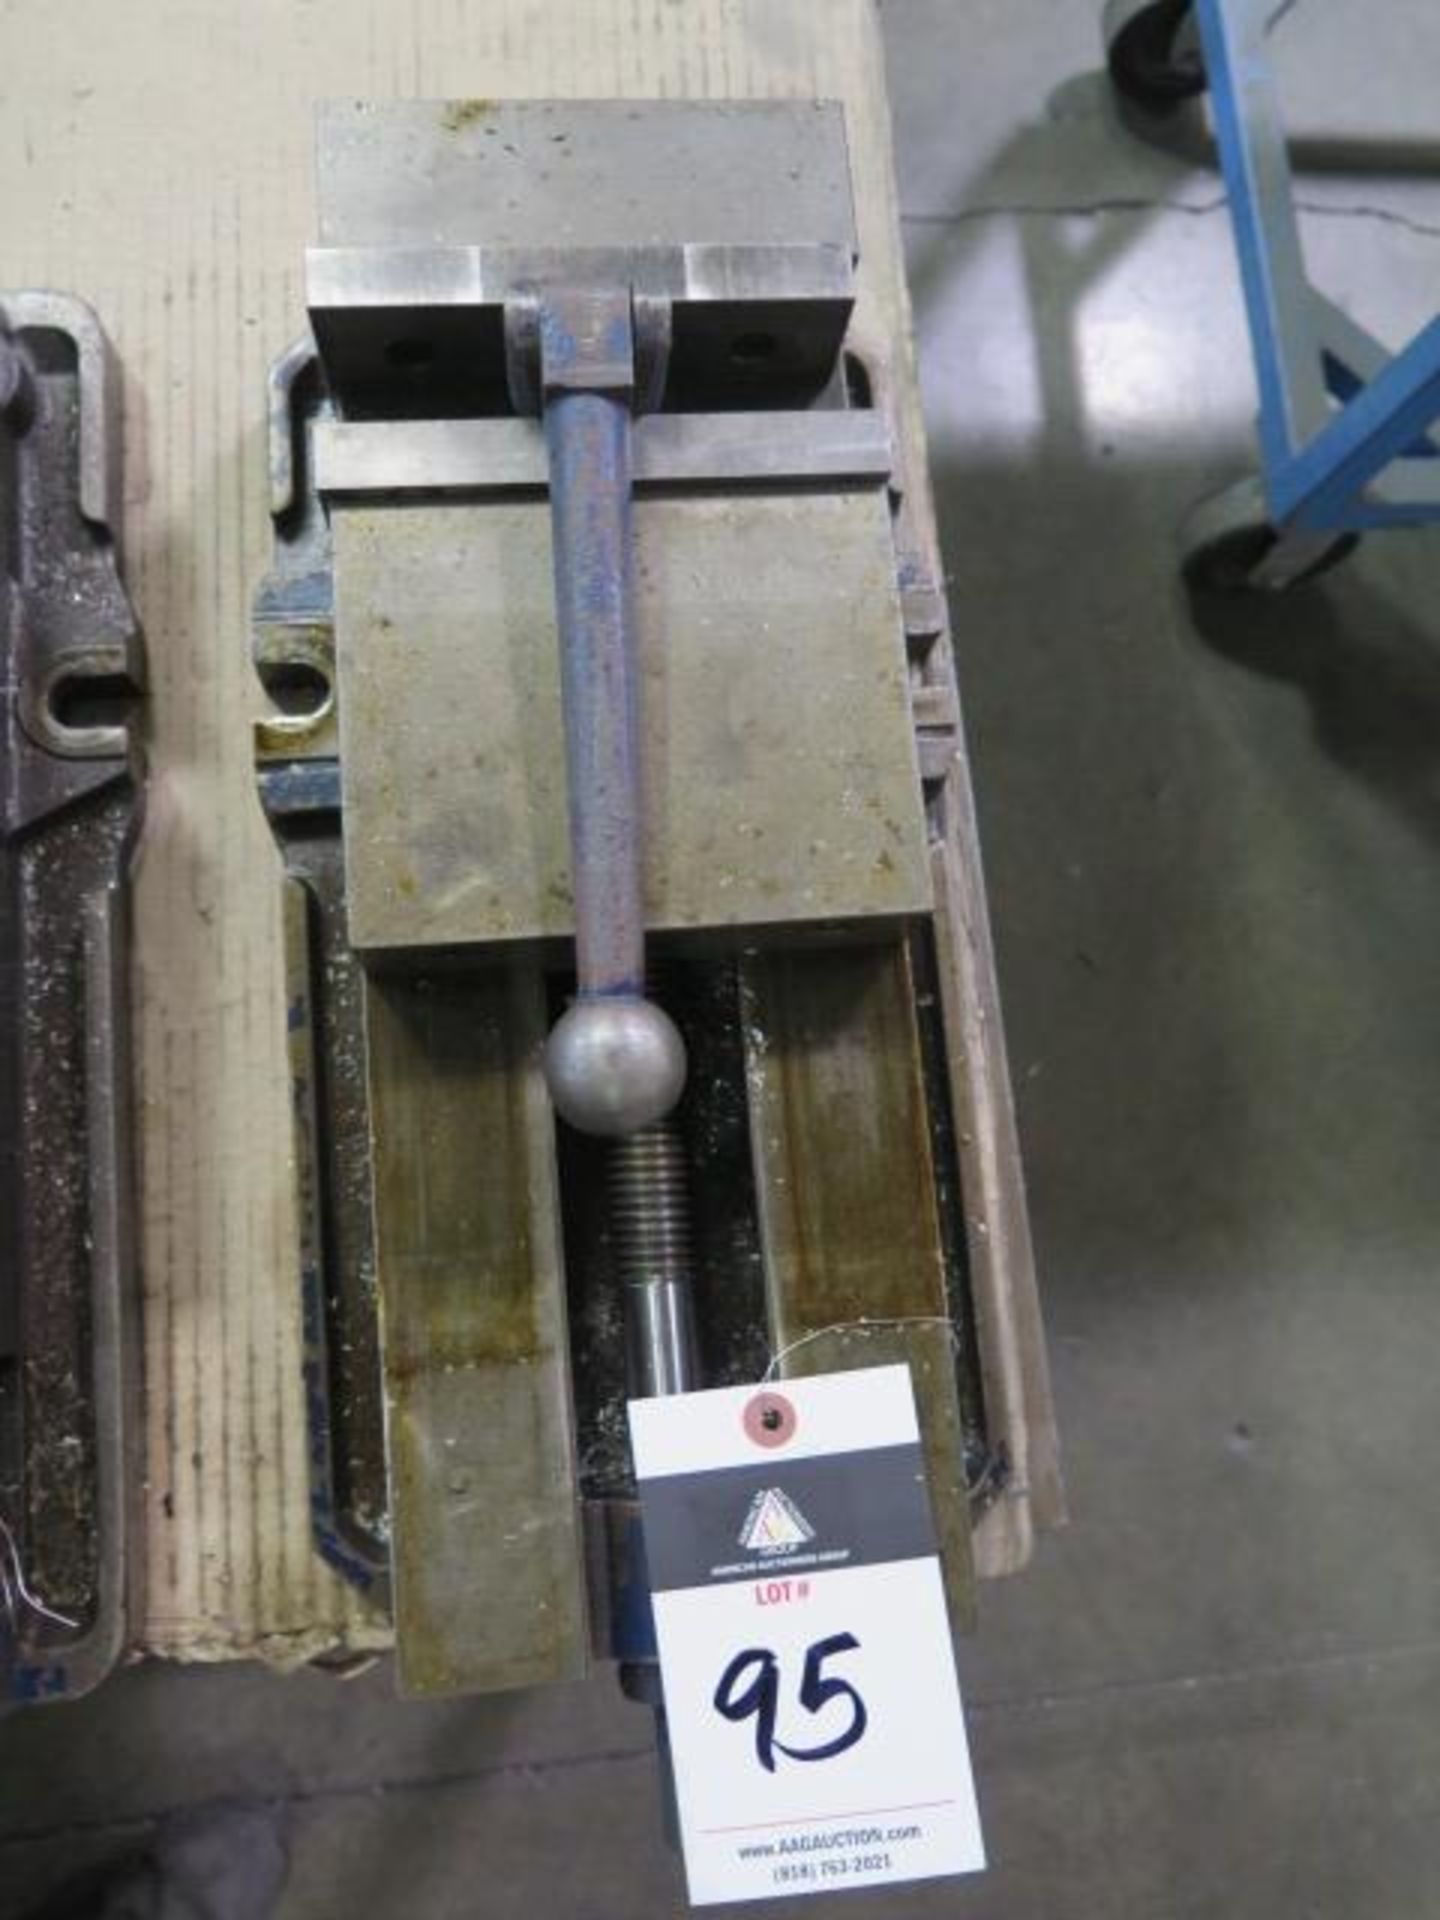 Parlec P688 6" Angle-Lock Vise (SOLD AS-IS - NO WARRANTY)